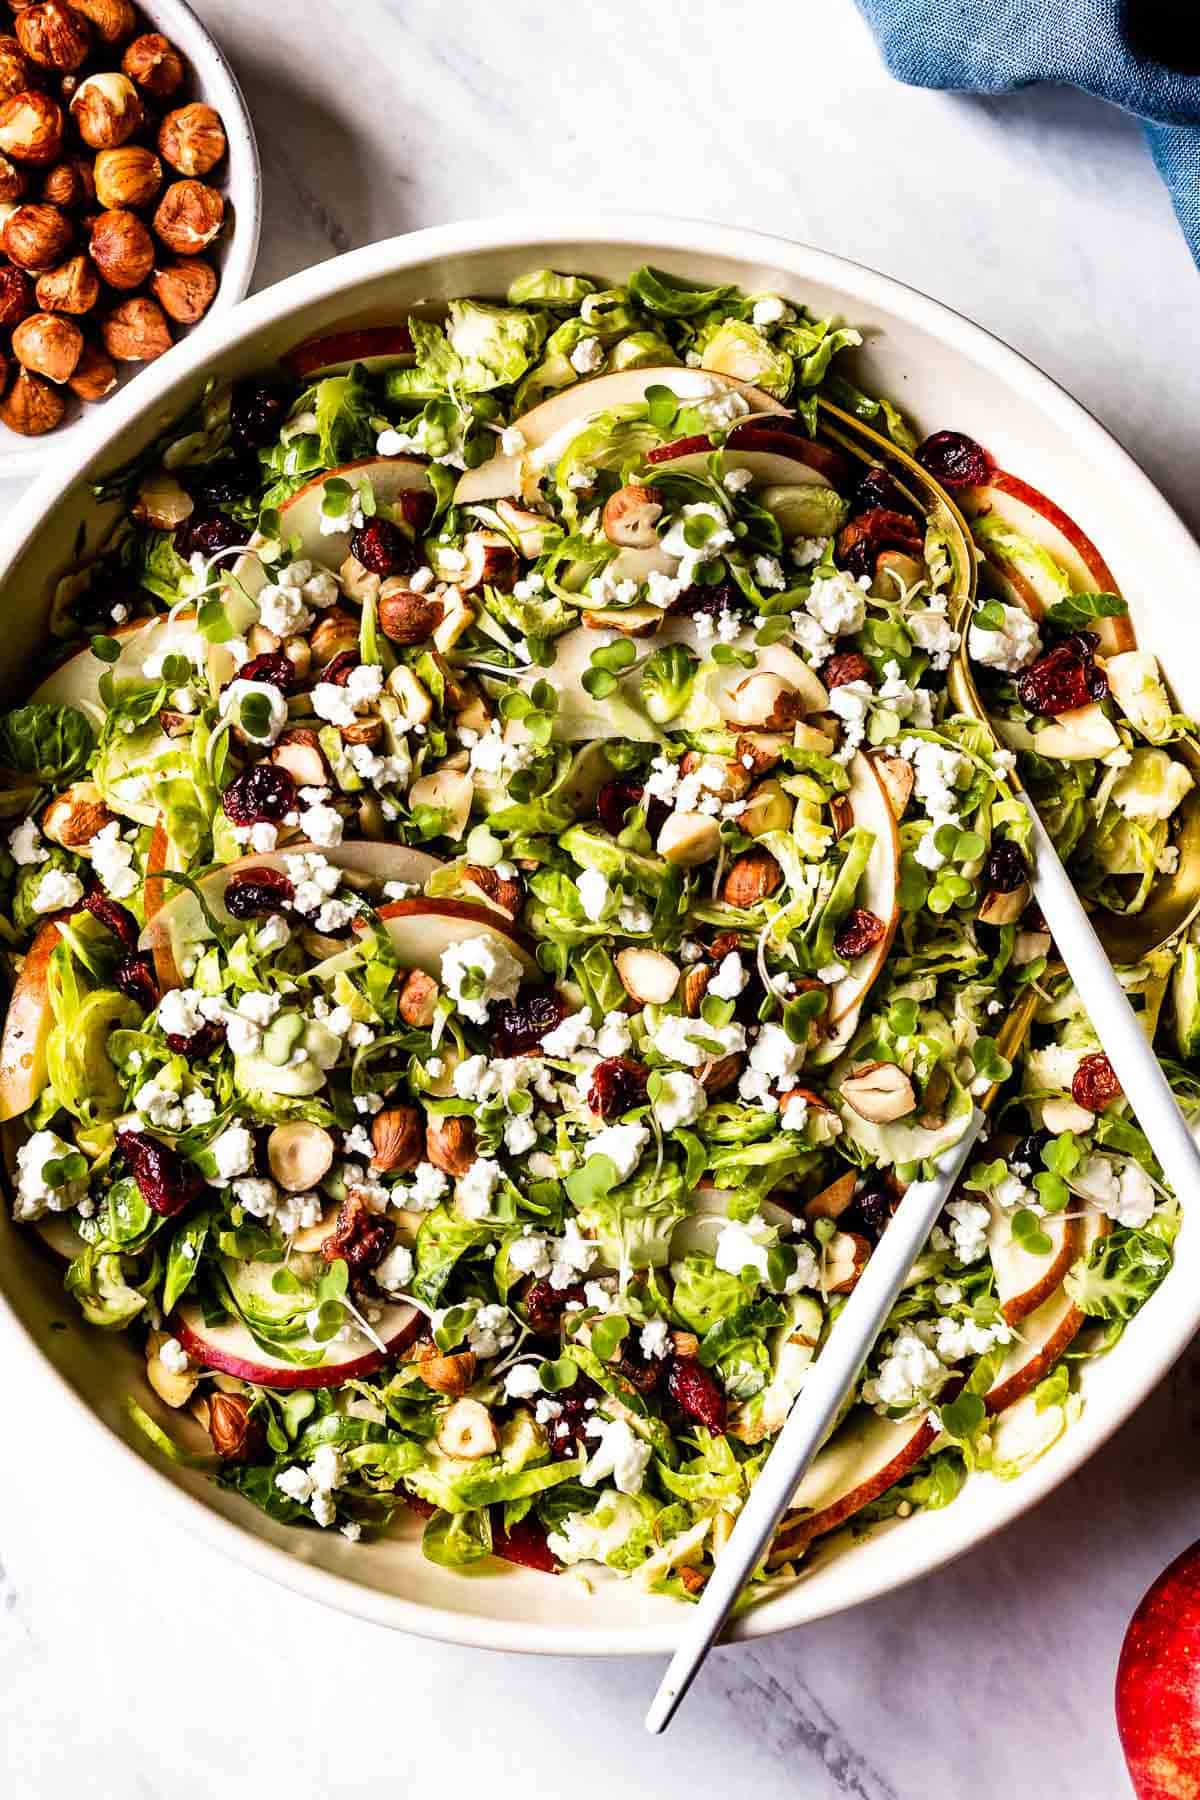 A large bowl of Shaved Brussel Sprout Salad served with hazelnuts on the side.